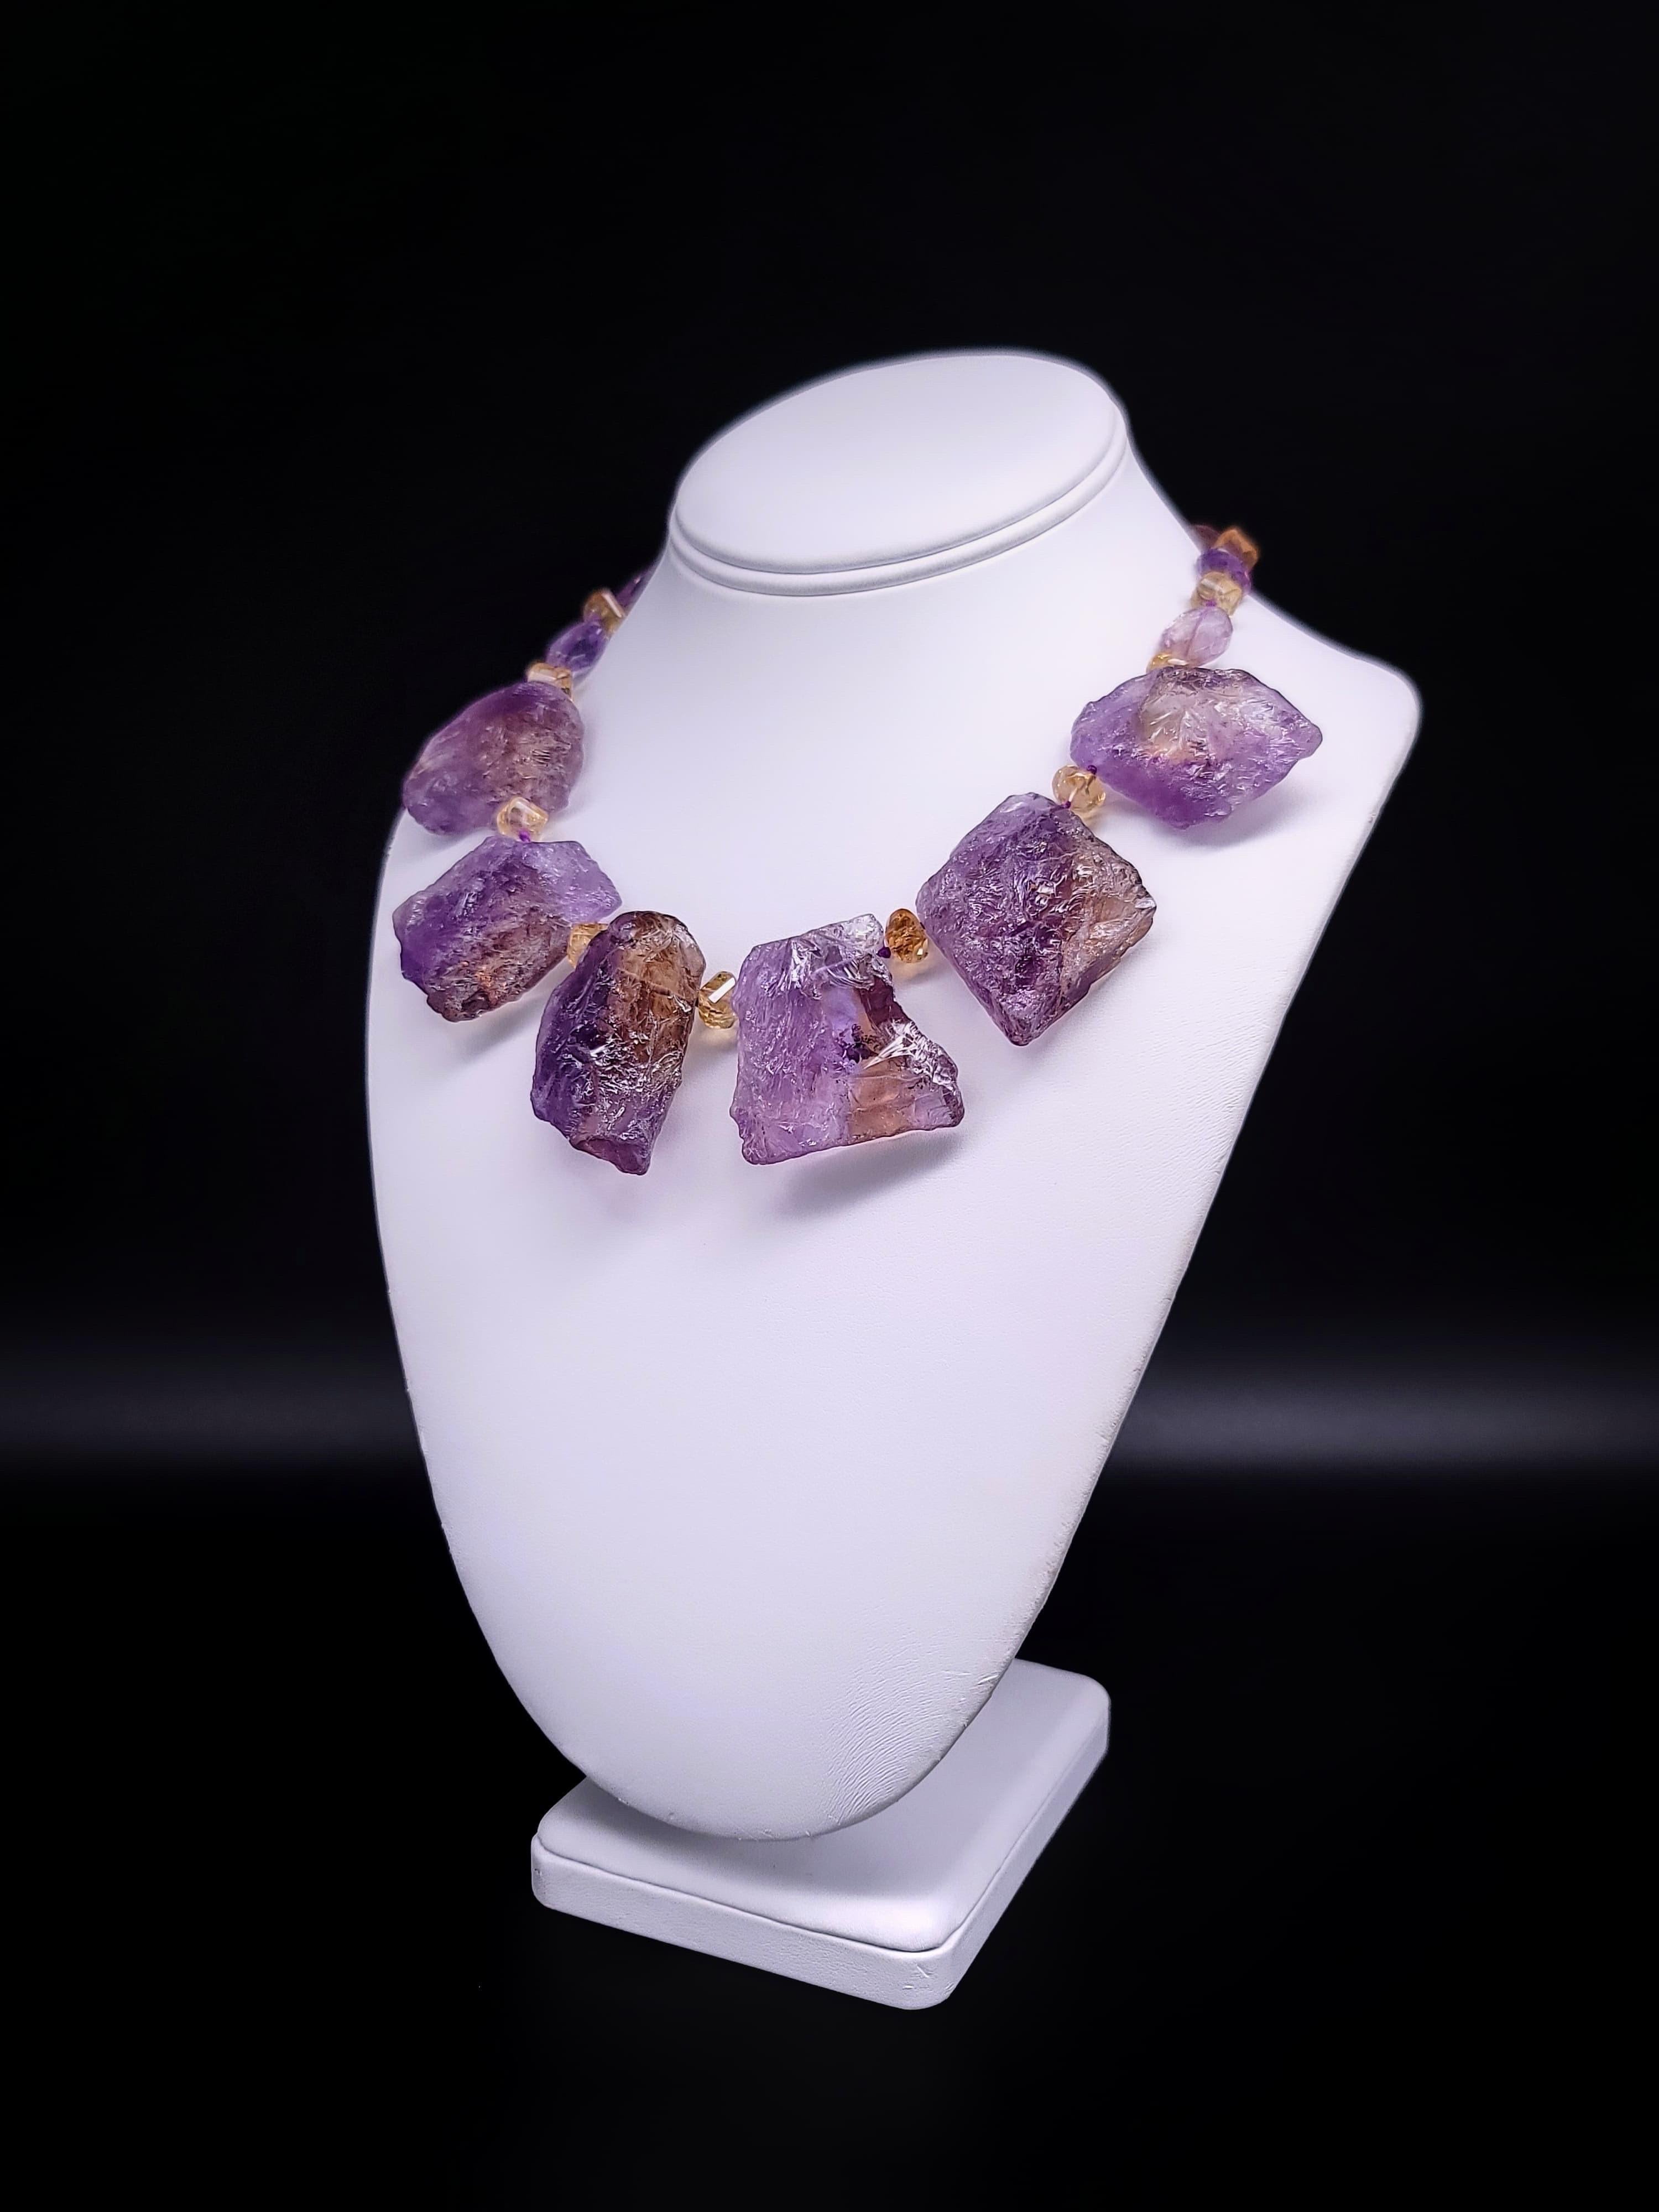 One-of-a-Kind

Large Ametrine specimen plates. Dramatic hammered ametrine ( a mixture of amethyst and citrine) in beautiful translucence stones hammered on the front side, and polished on the back. It is suspended from a necklace of facetted